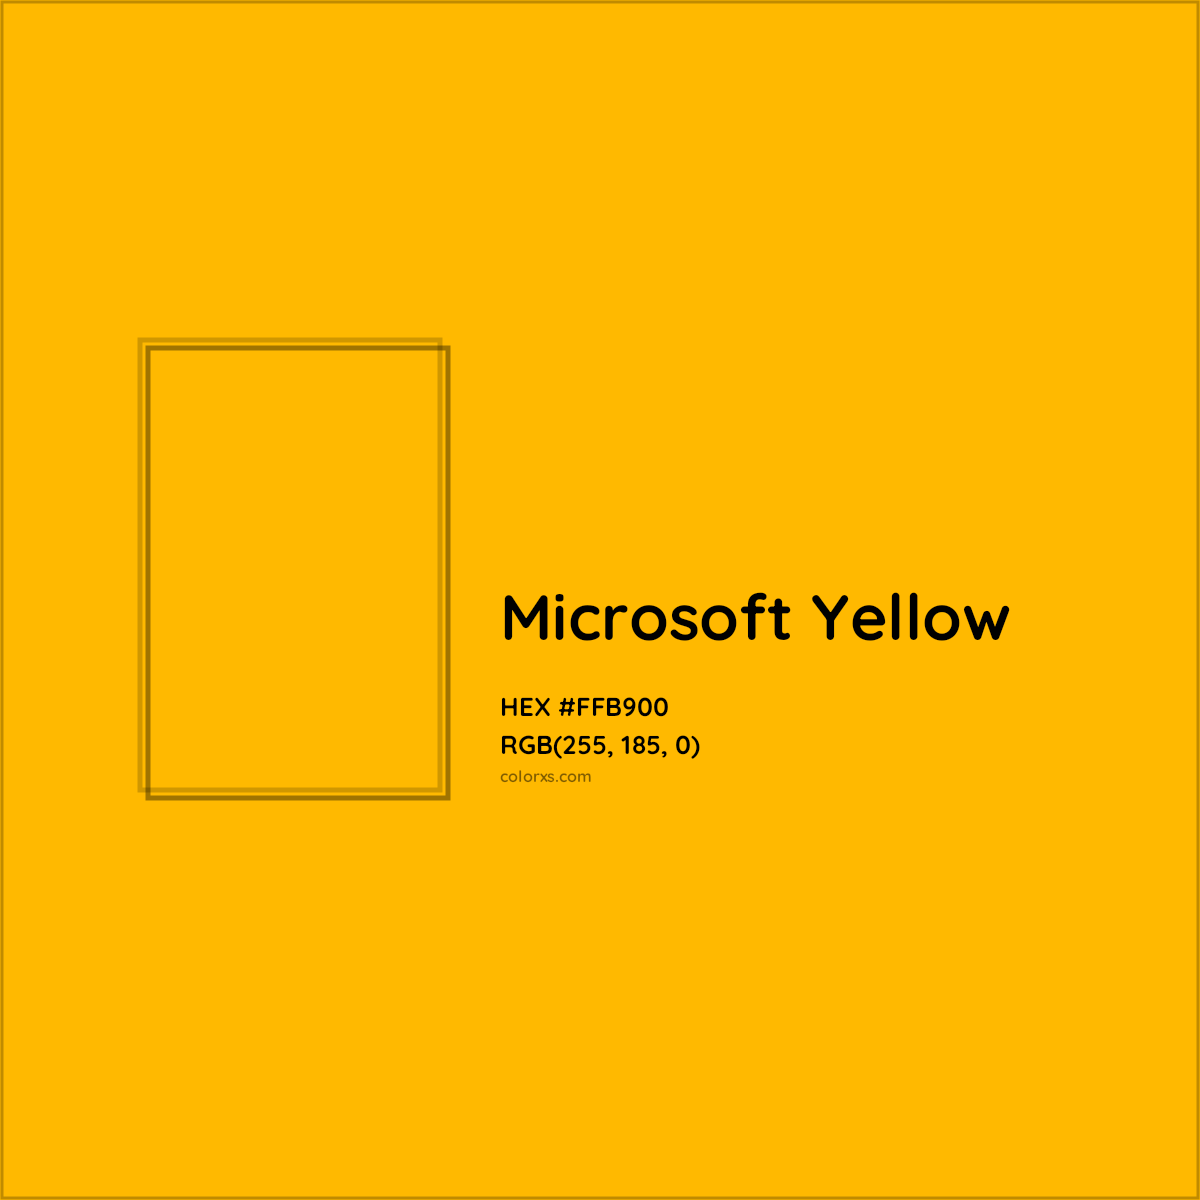 HEX #FFB900 Microsoft Yellow Other Brand - Color Code